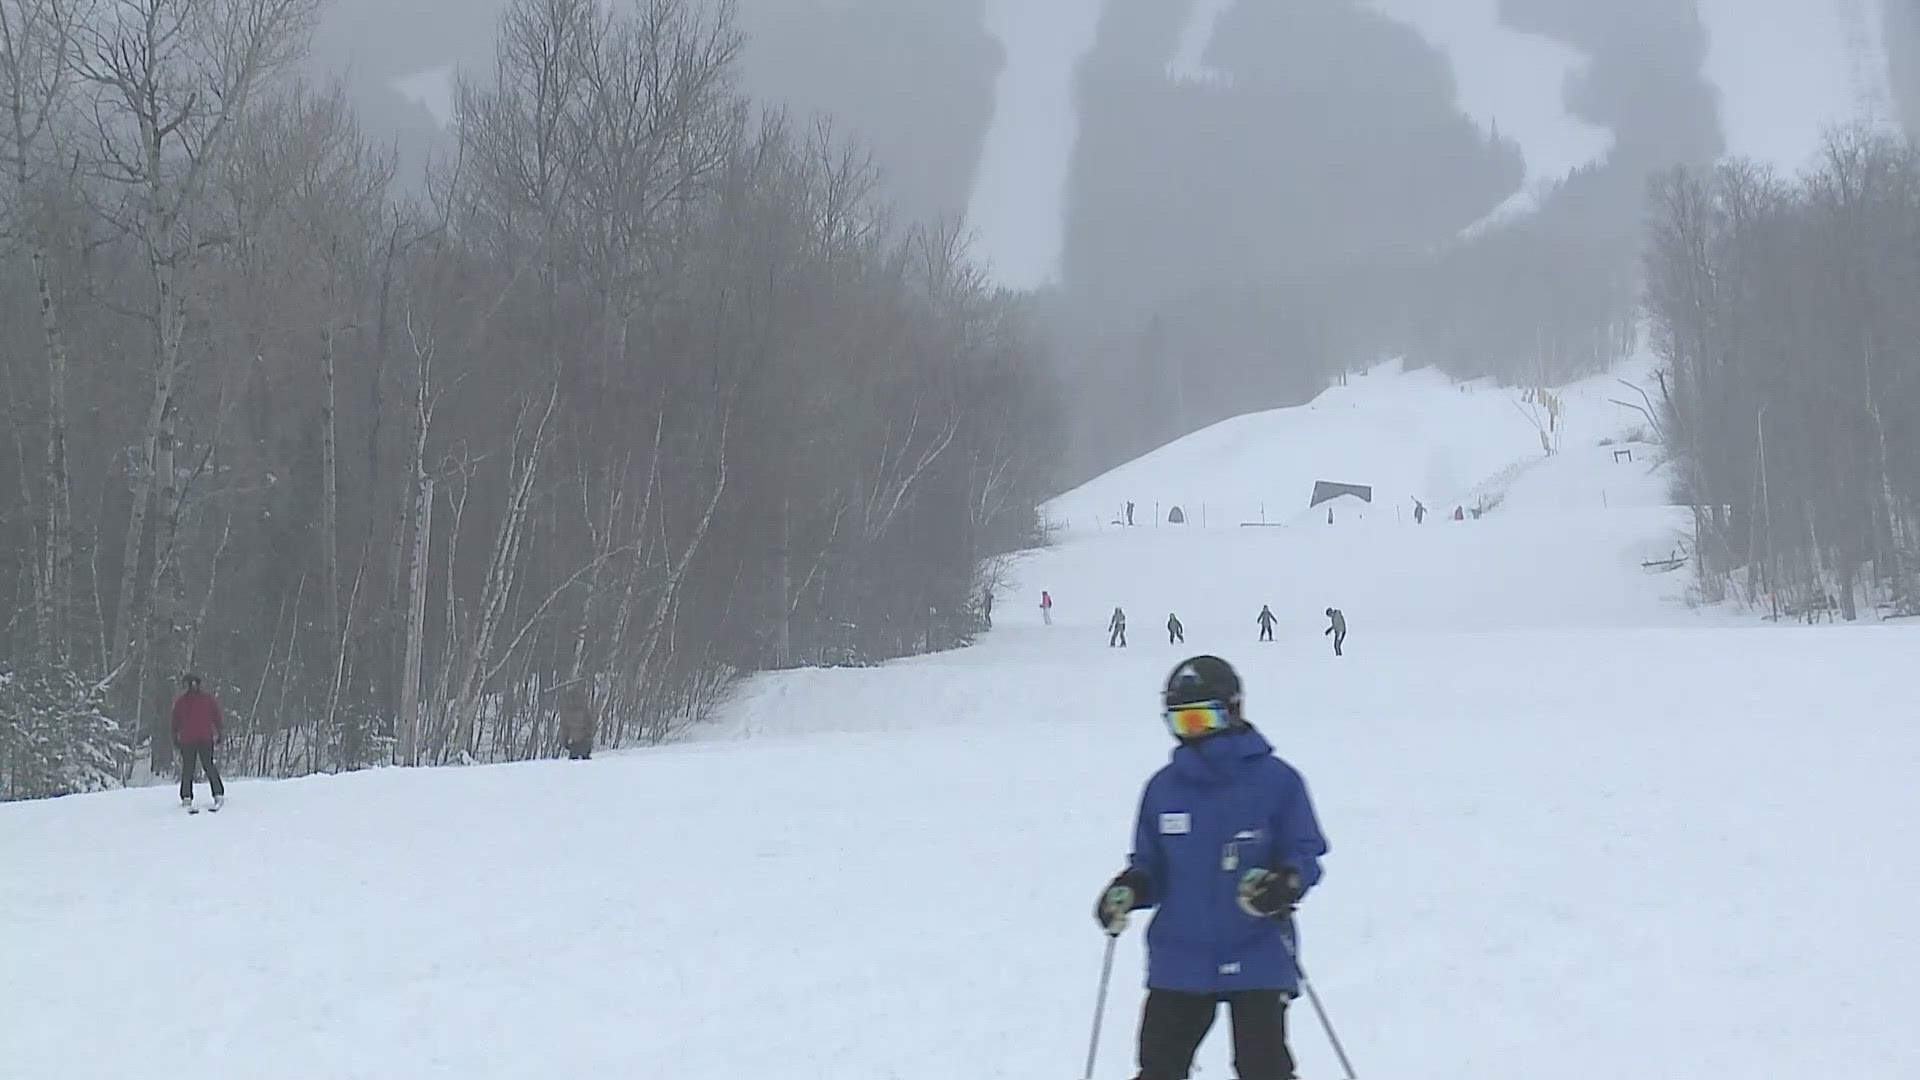 Many ski areas in western Maine were inundated with late-season snow, extending the season for some and allowing others to reopen.